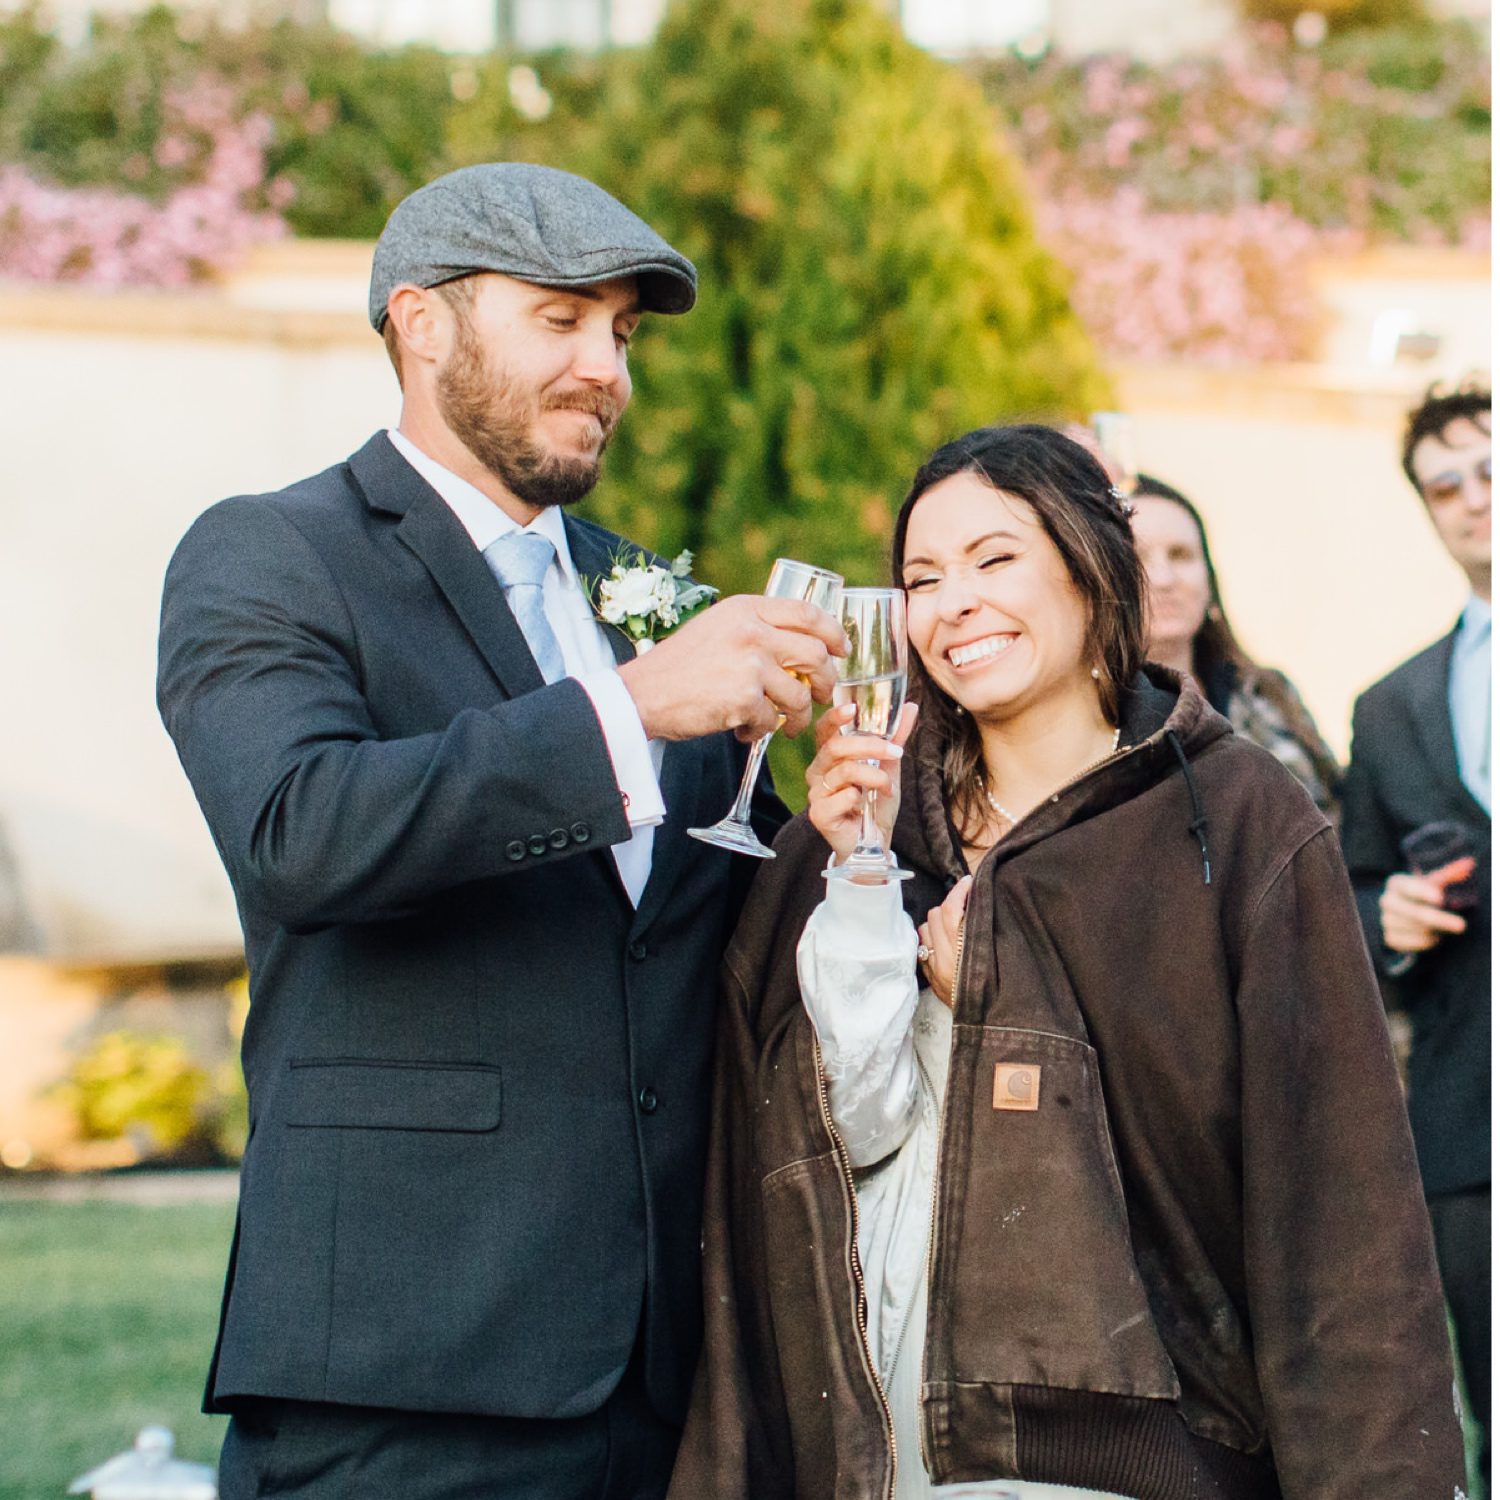 Champagne photos at paso robles french wedding